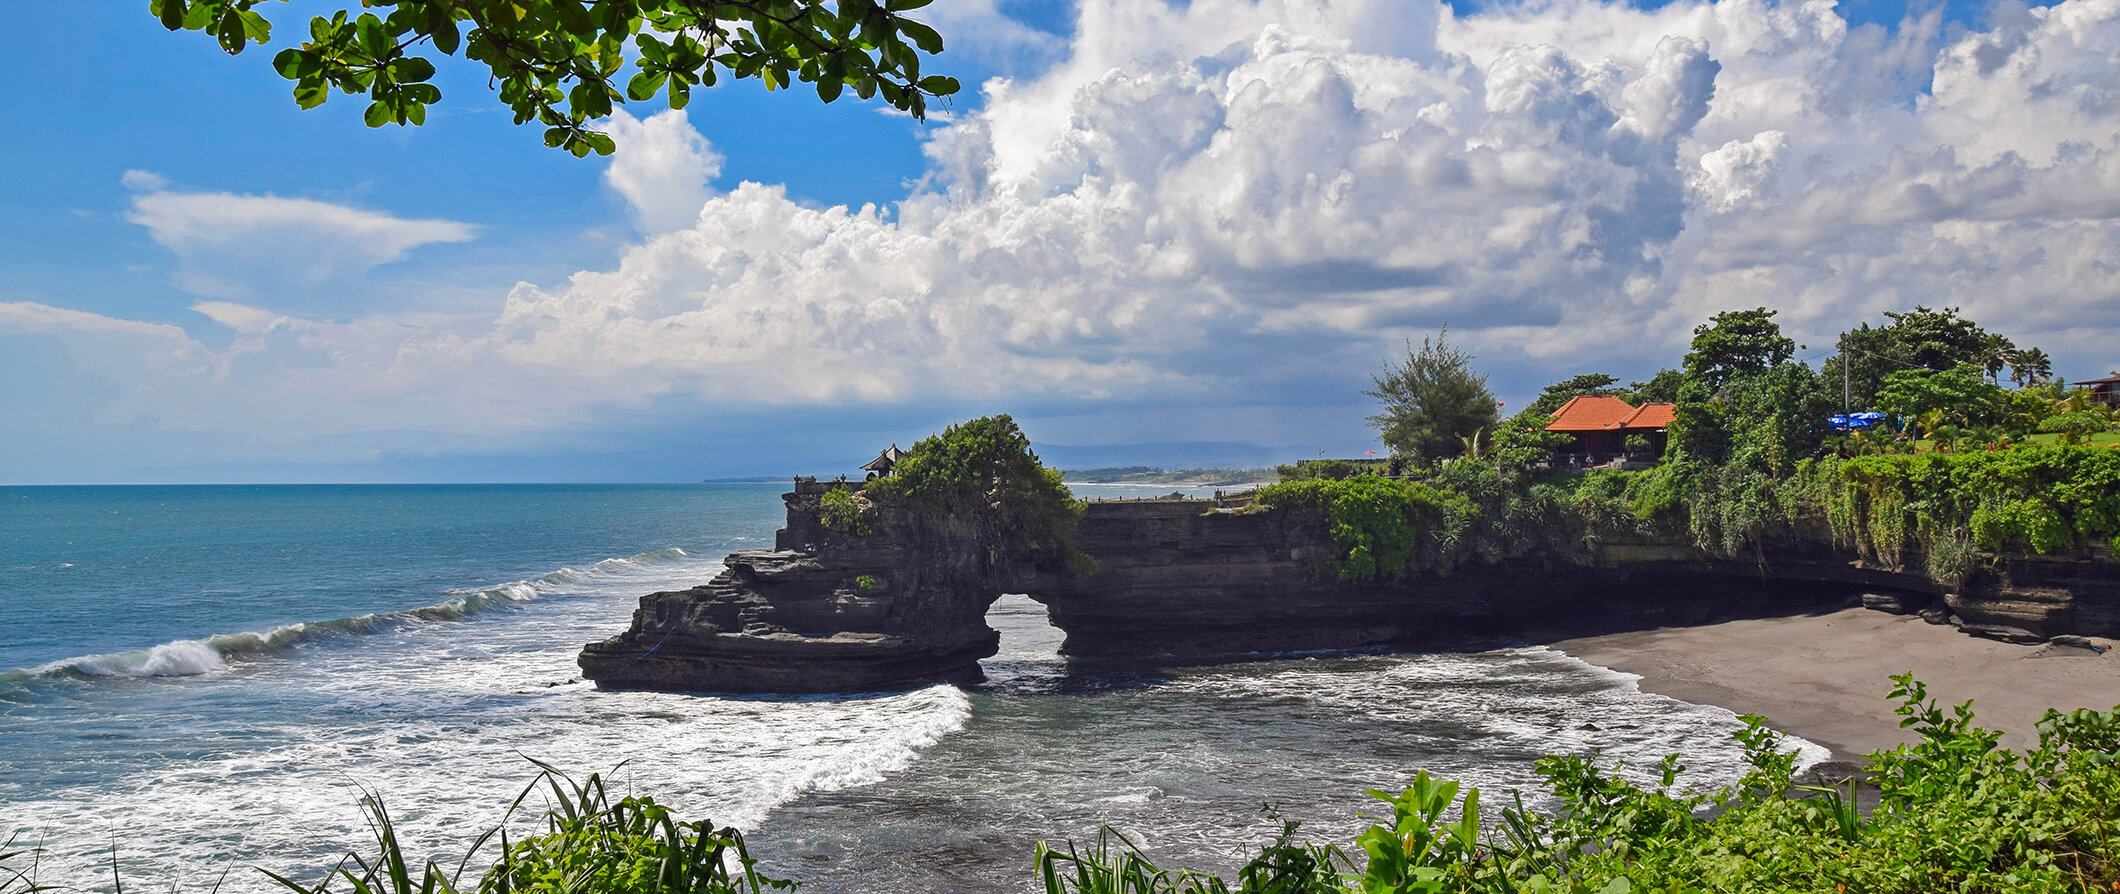 BALI: most COMPLETE Travel Guide - ALL SIGHTS in 1 hour + NUSAS